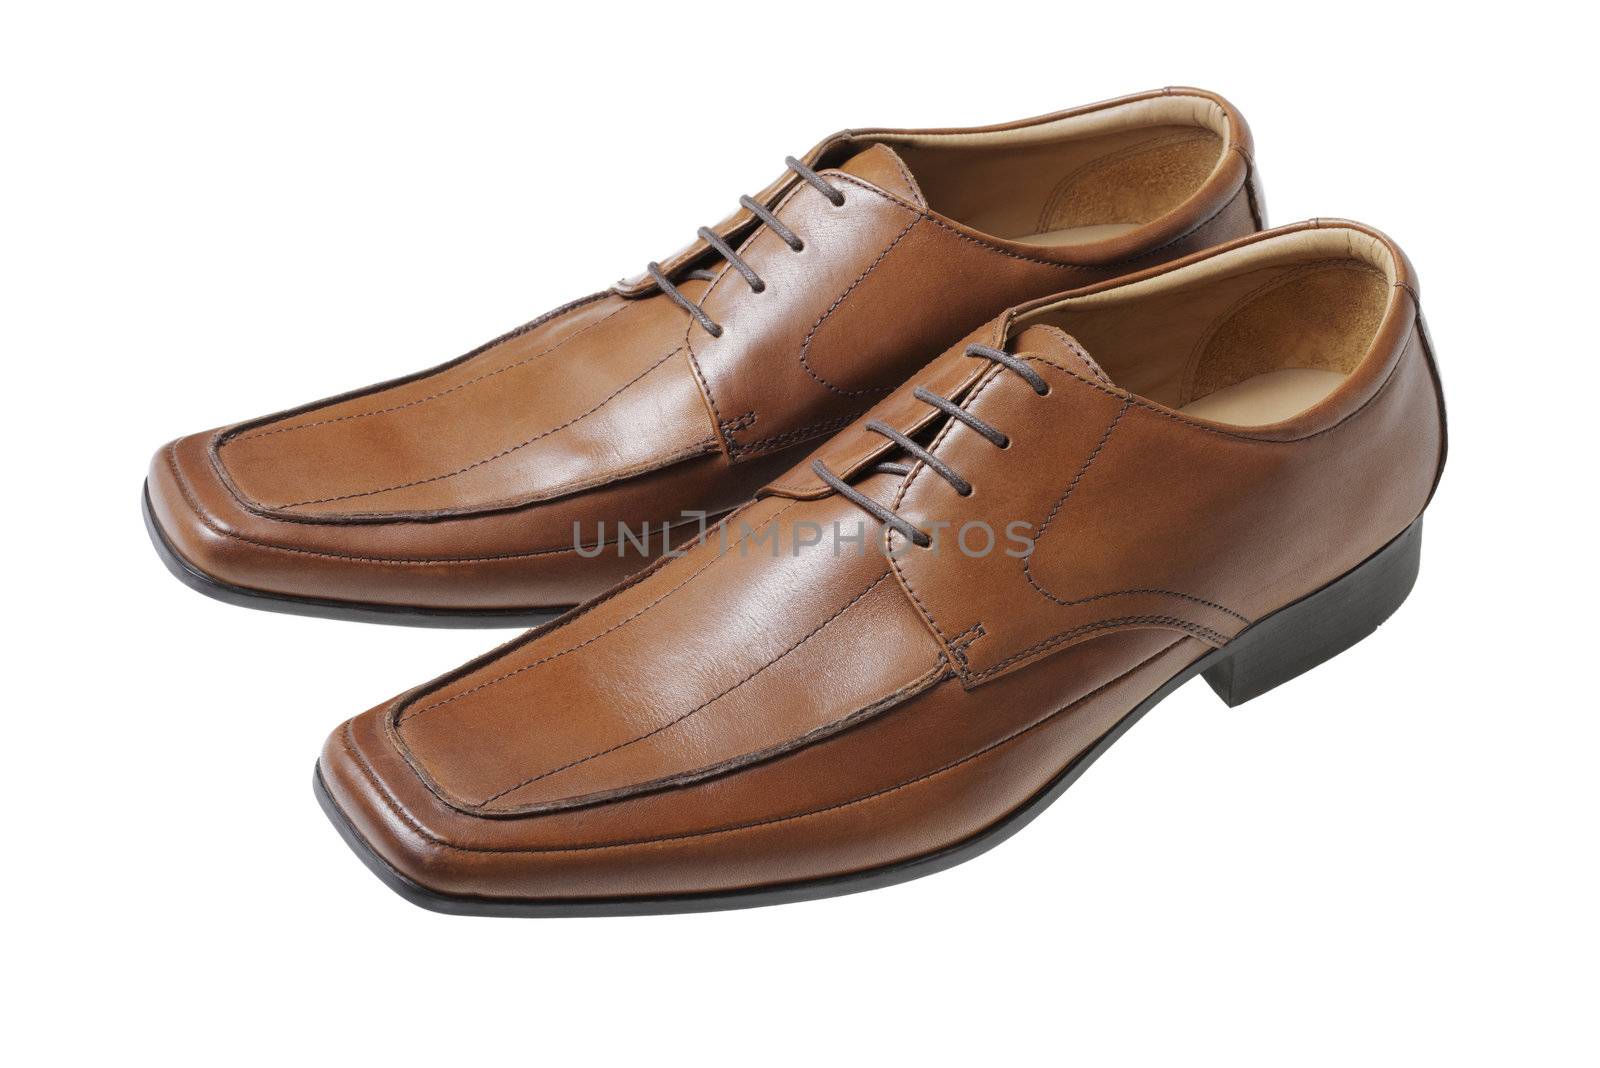 Men's brown leather dress shoes